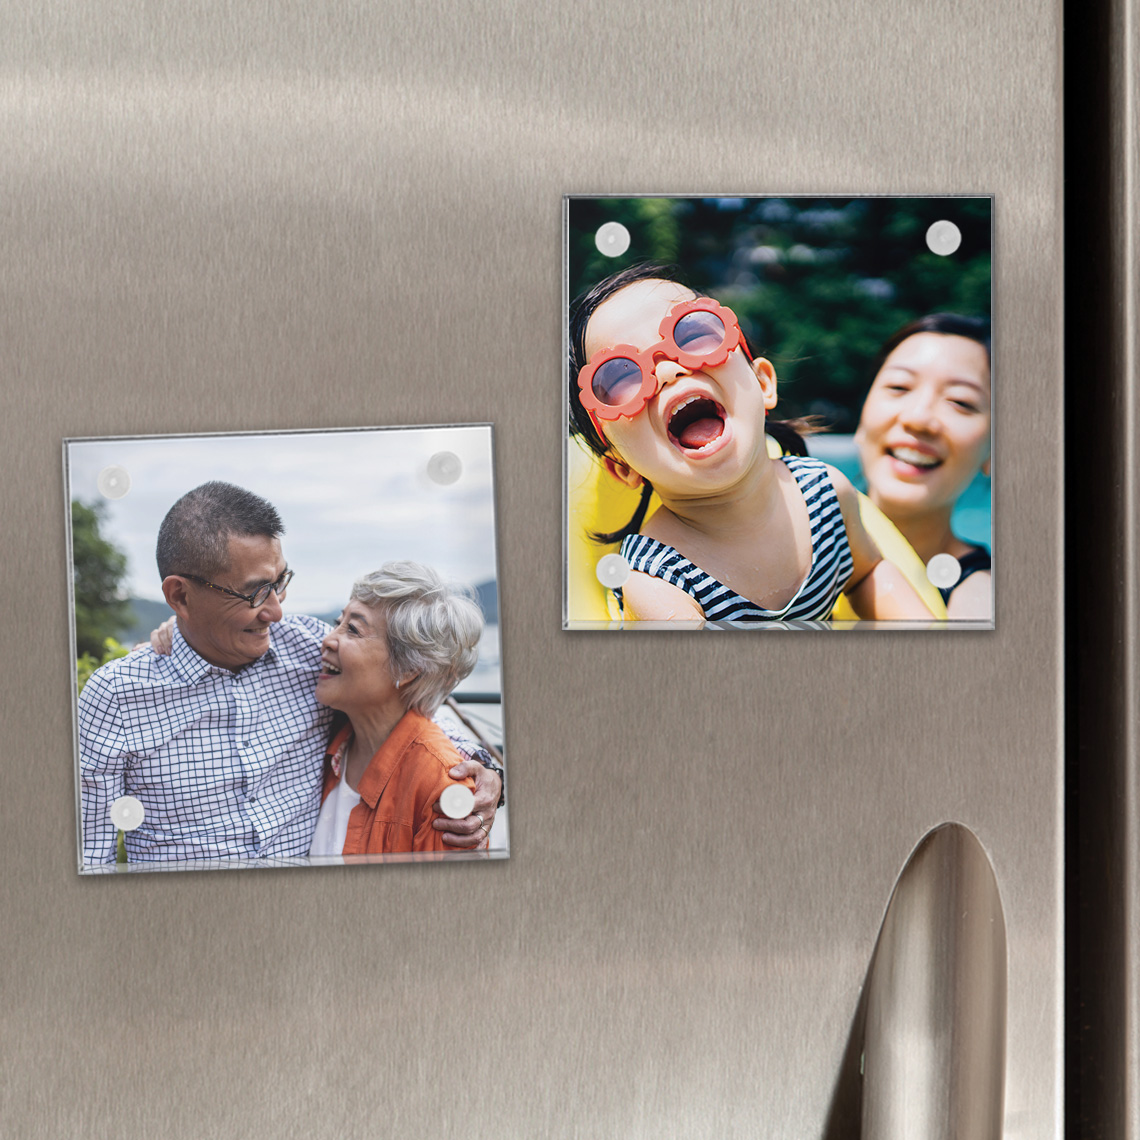 X-bet MAGNET magnetic picture frames - picture magnets for refrigerator -  magnetic picture frame set - magnet photo